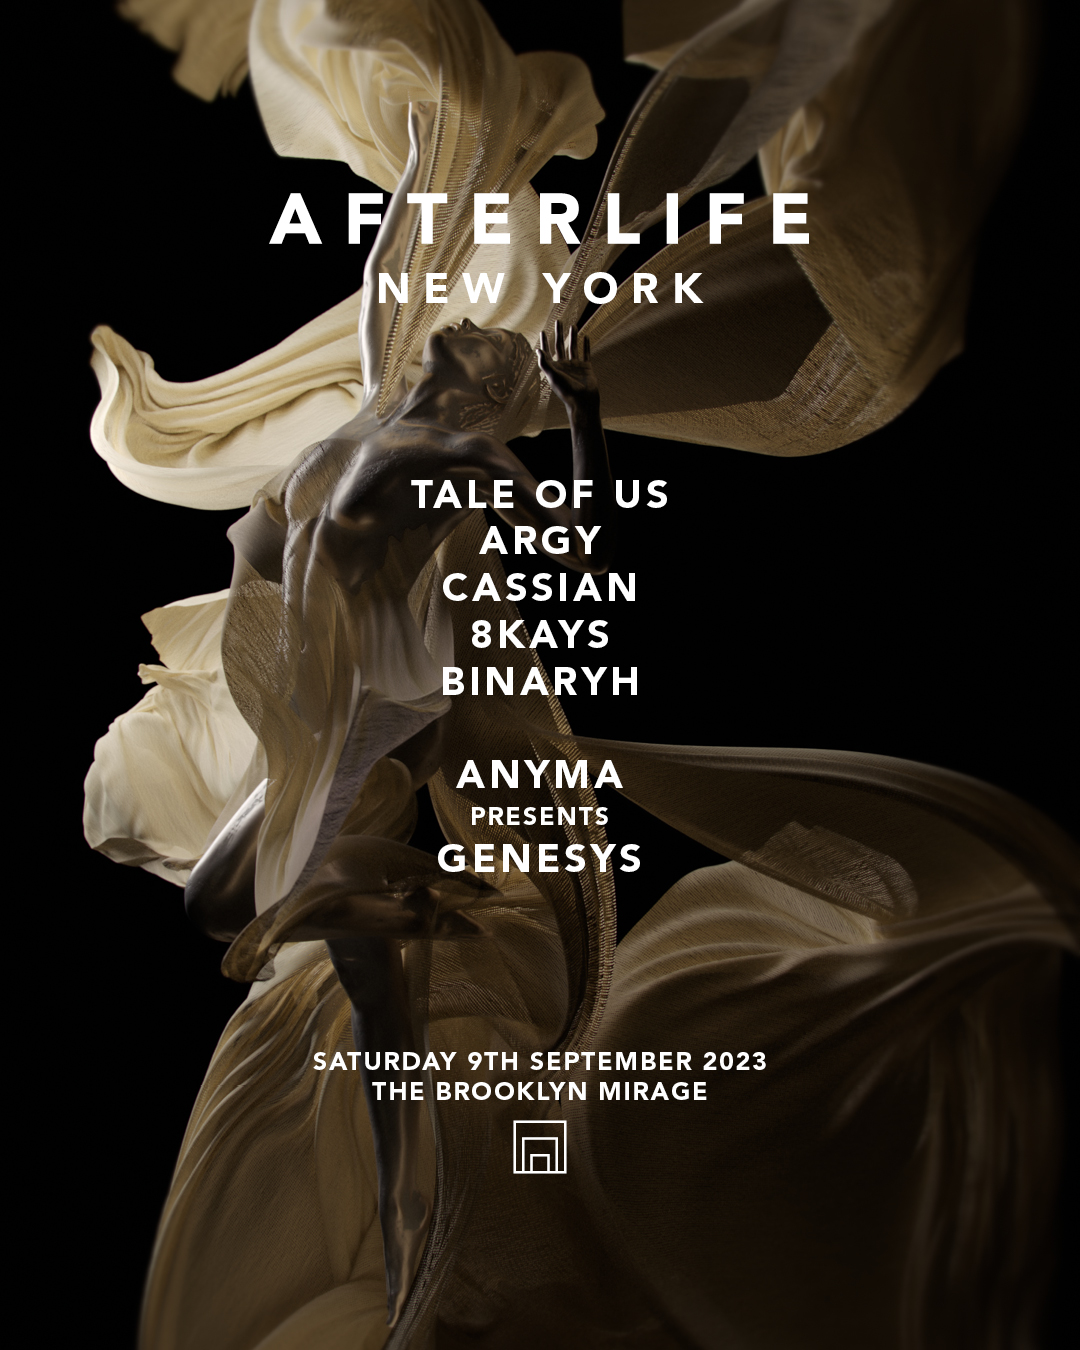 Afterlife Los Ángeles 🔥🌴 October 13th and 14th. @taleofus @anyma  @mrak_ofc @argyofficial @adriatique @cassian @laylabenitez…